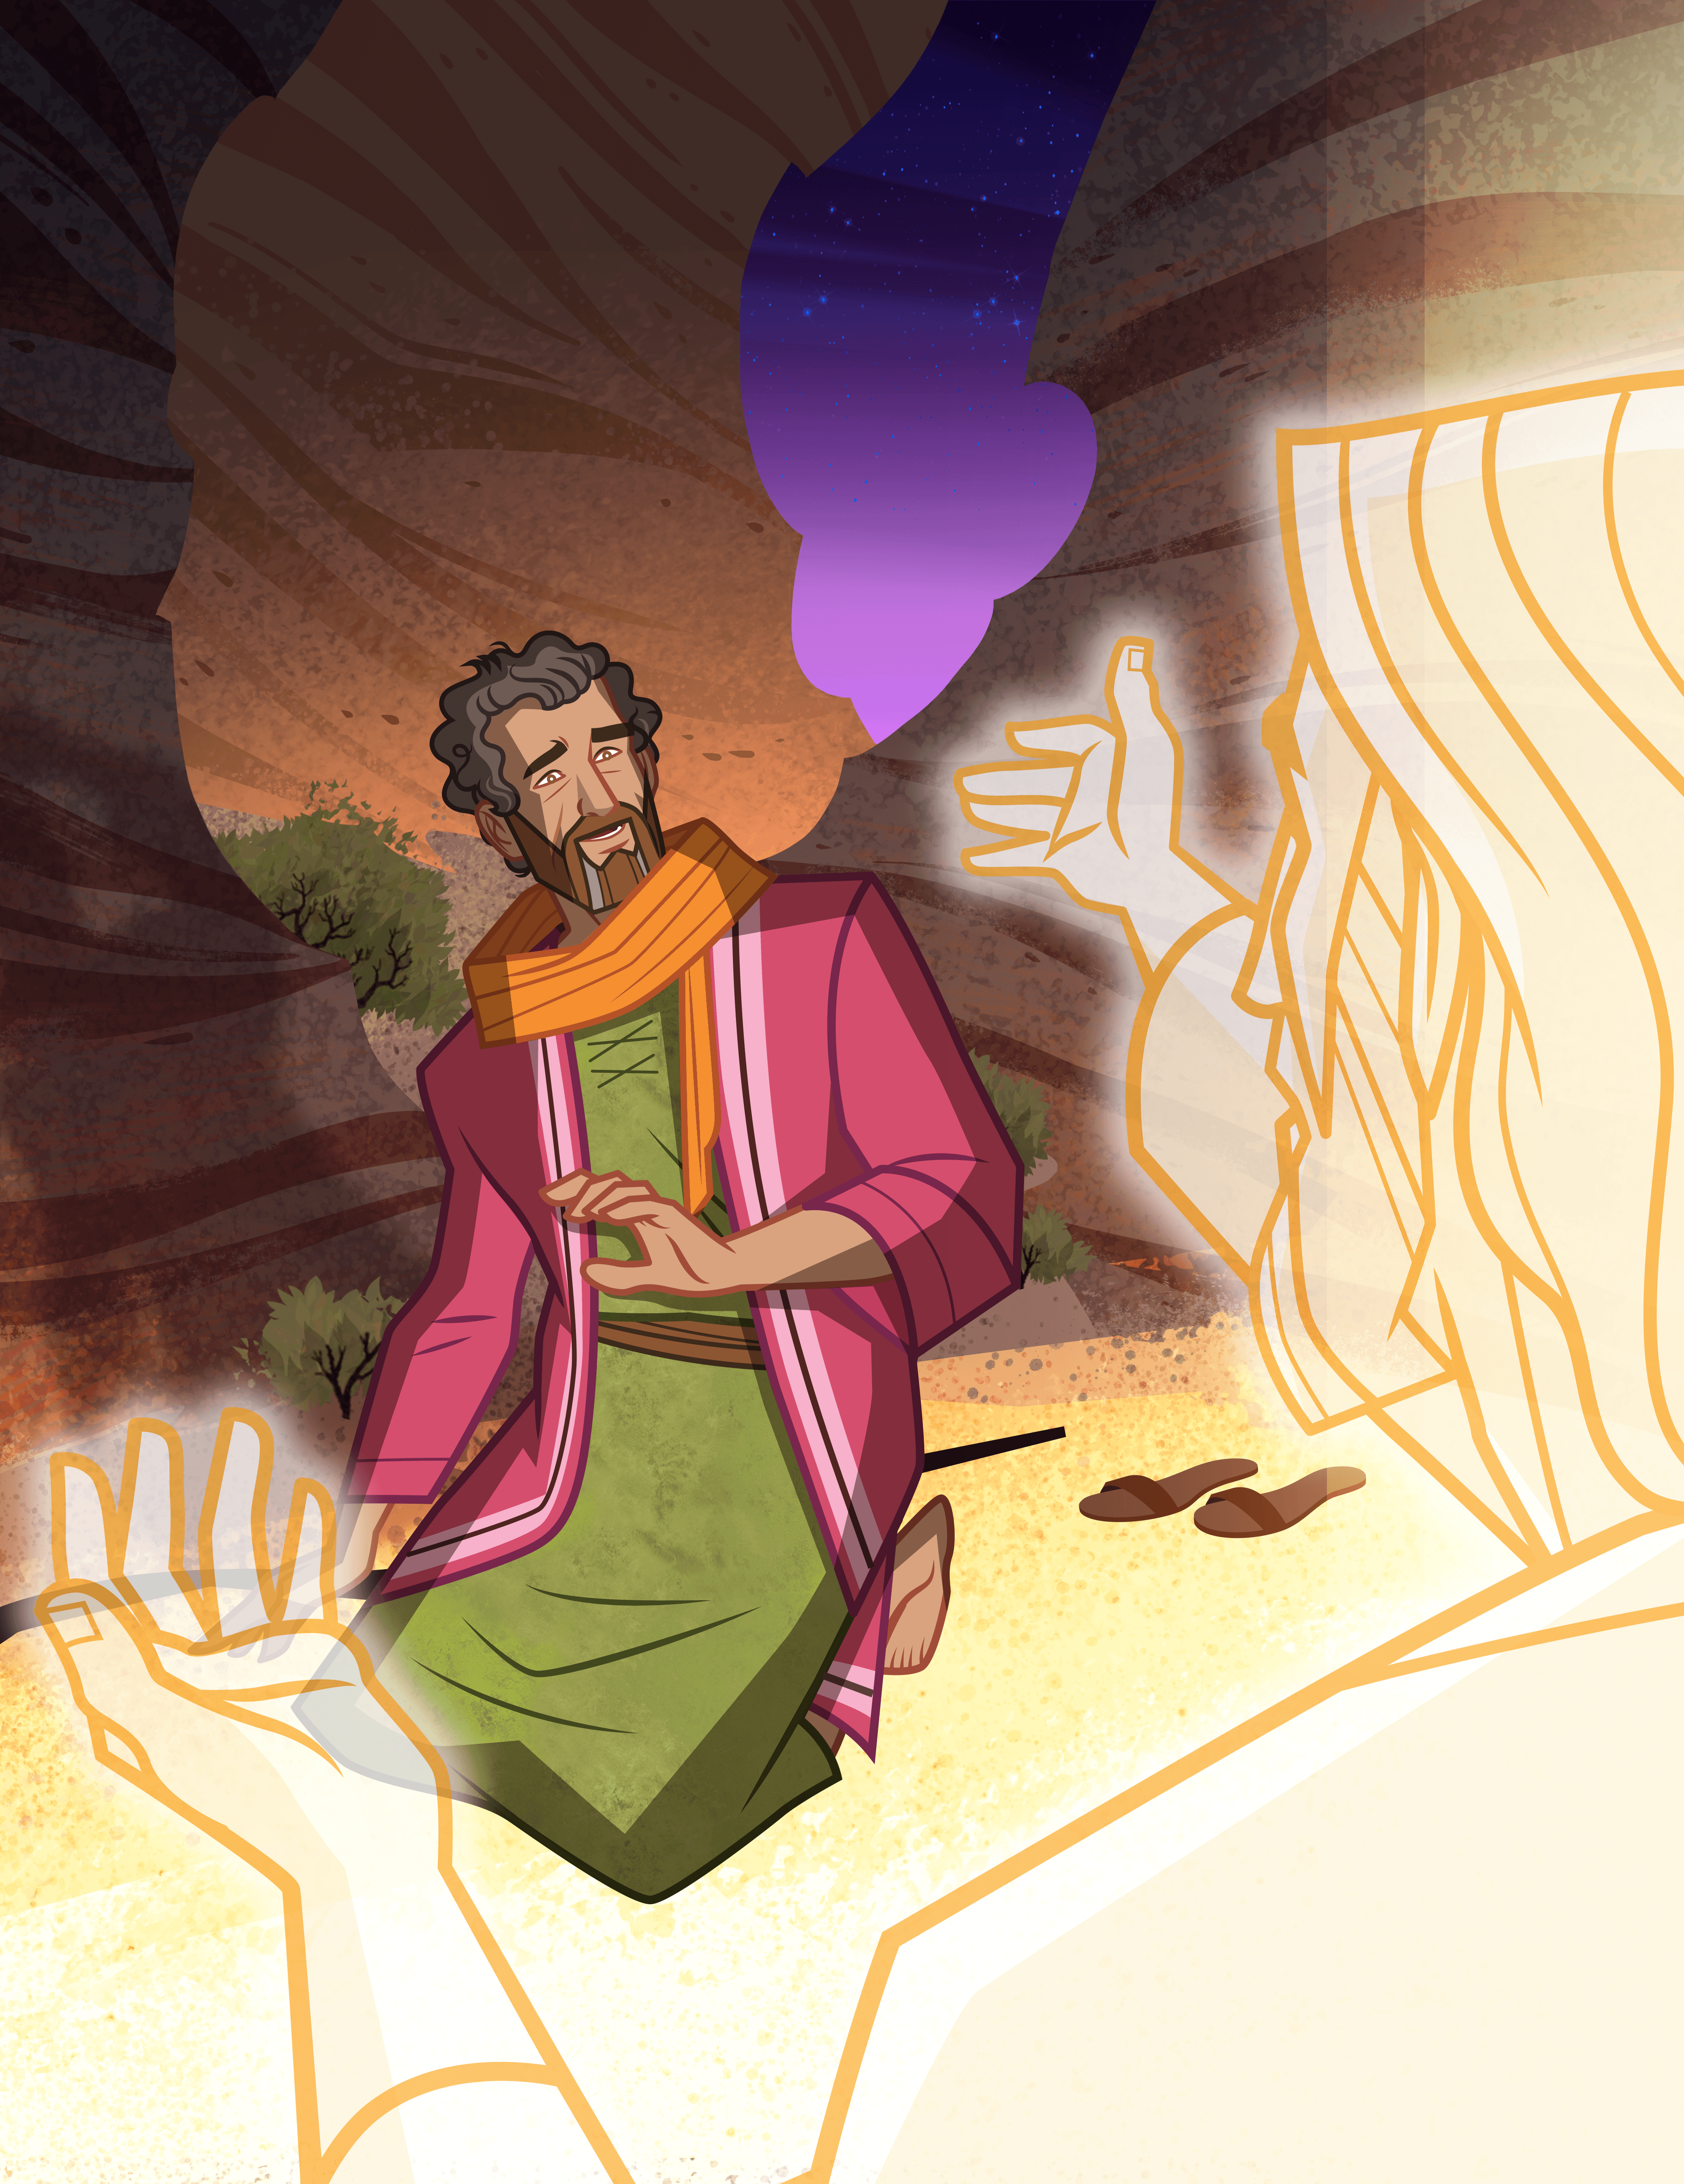 Cover art for Old Testament Scripture Stories. Features Jehovah appearing unto Moses on Mount Sinai.